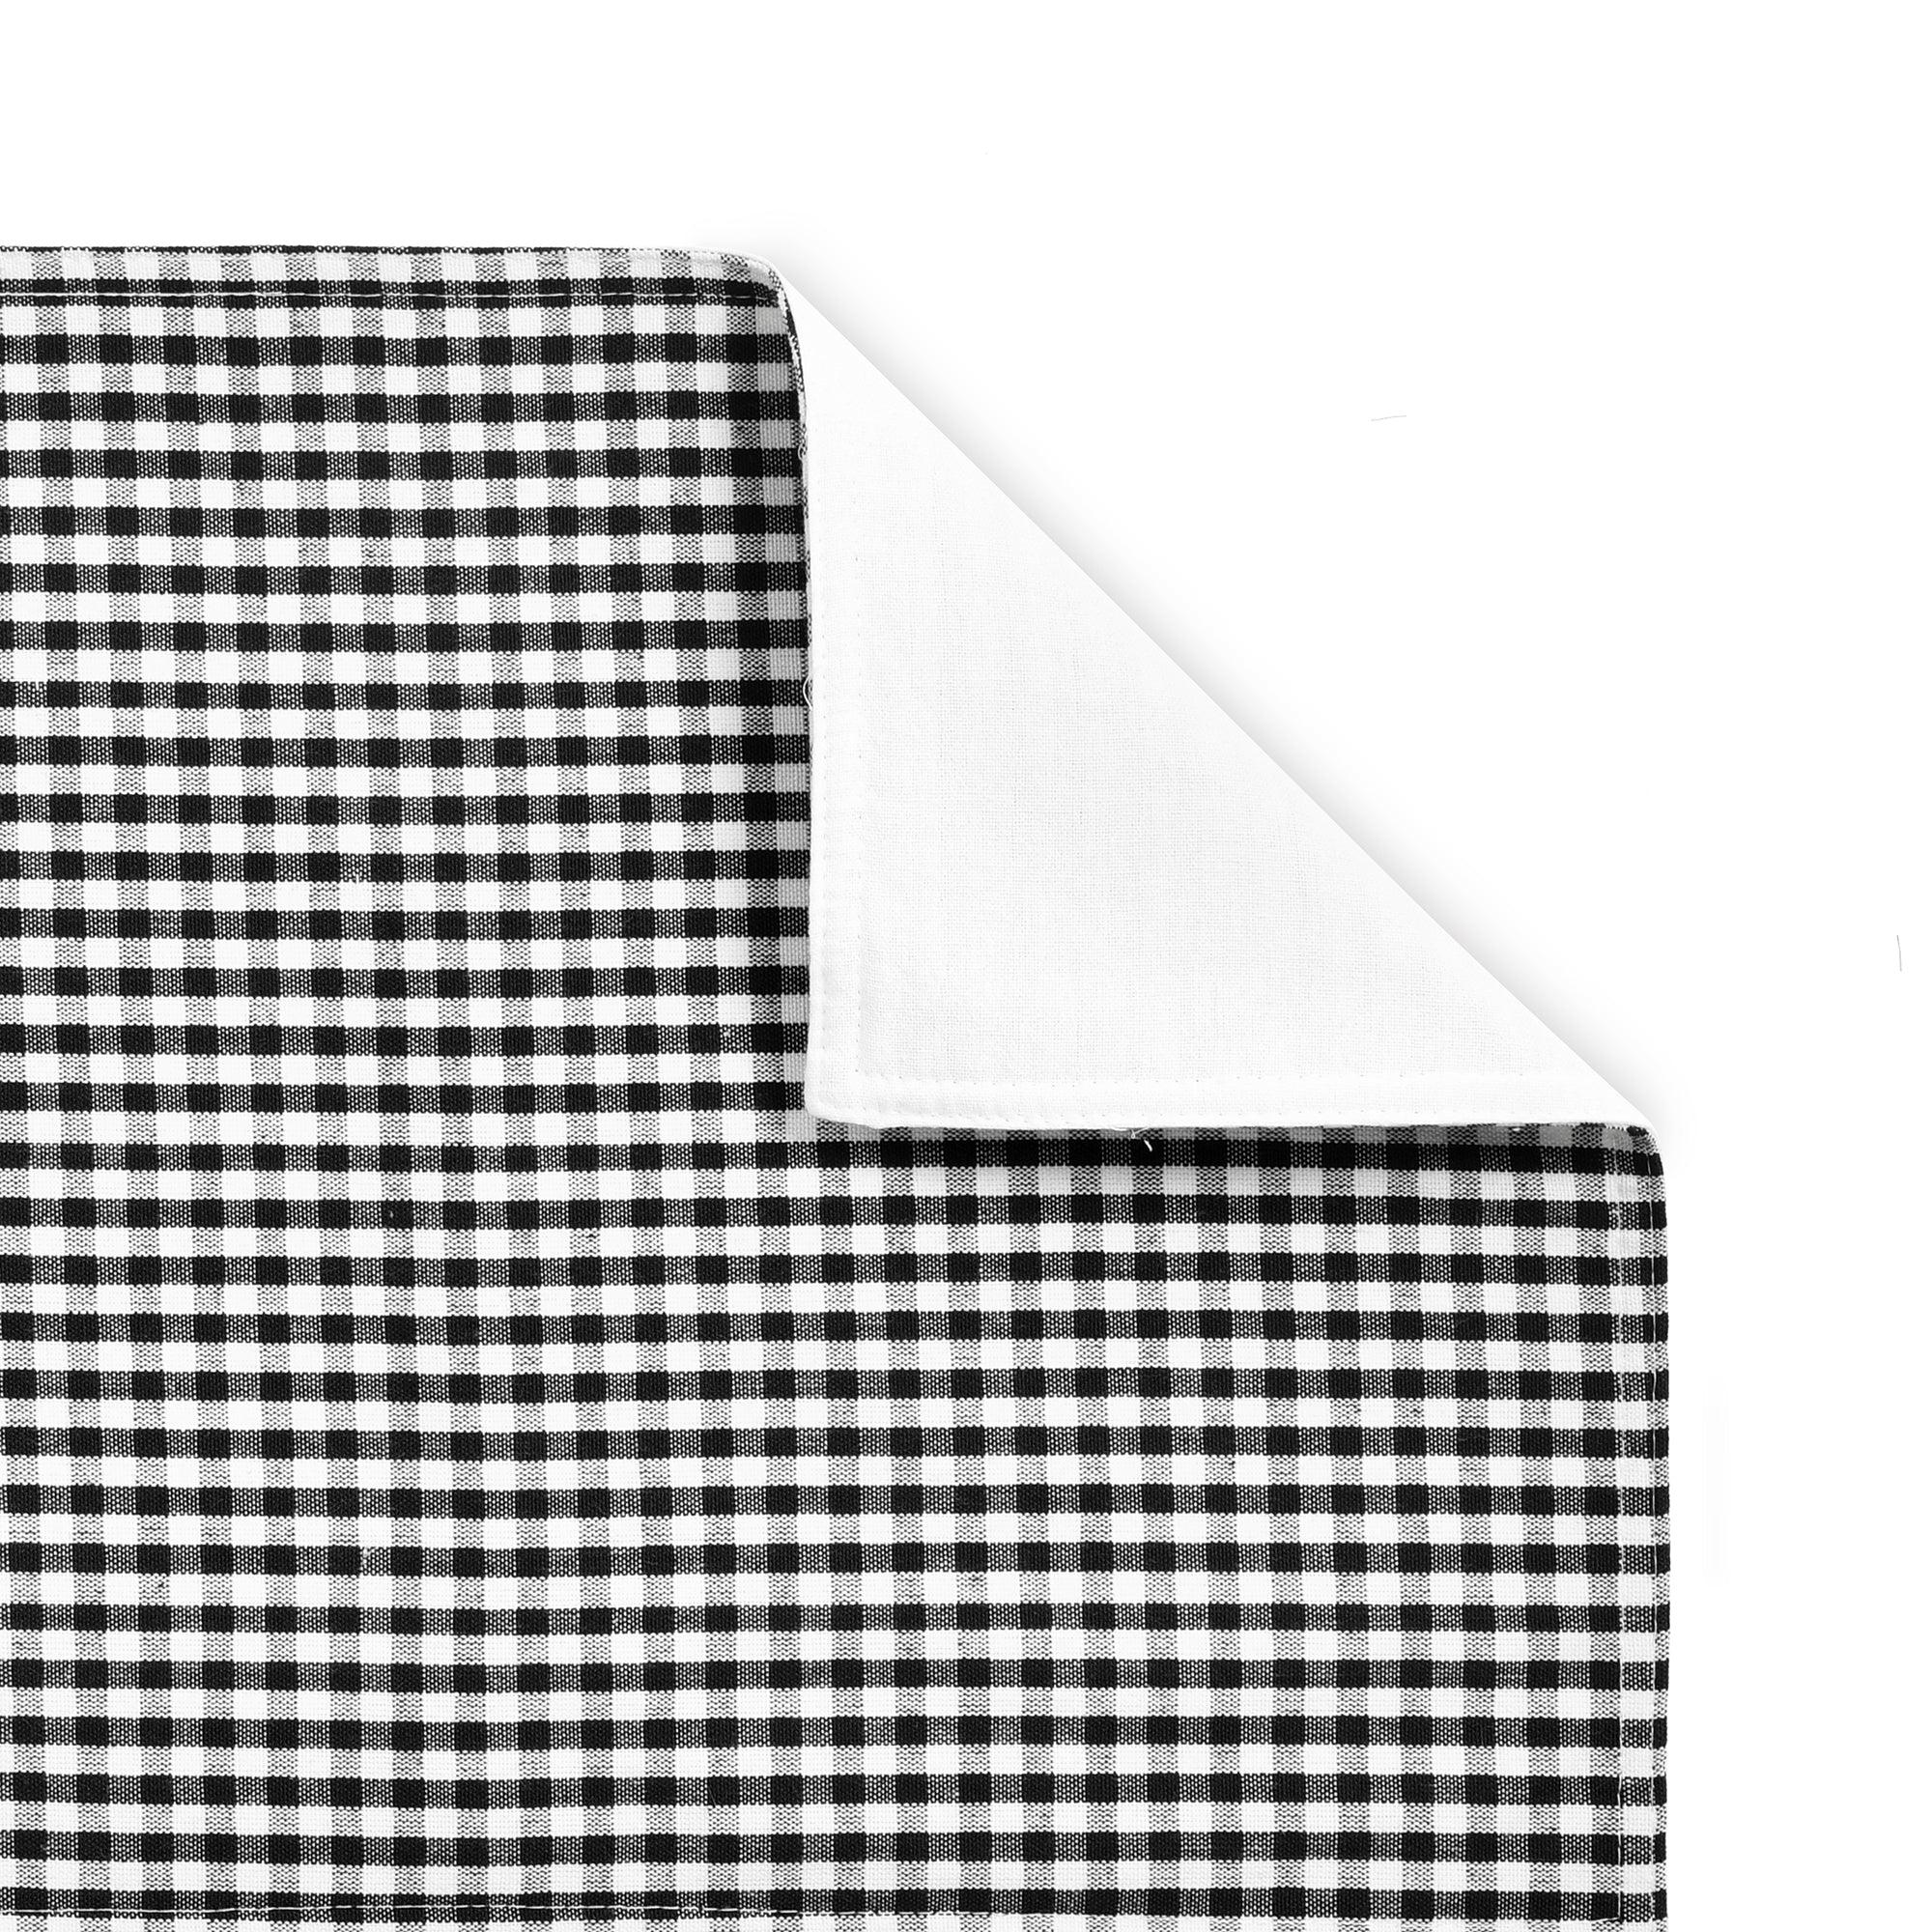 Gingham Check Yarn Dyed Table Runner